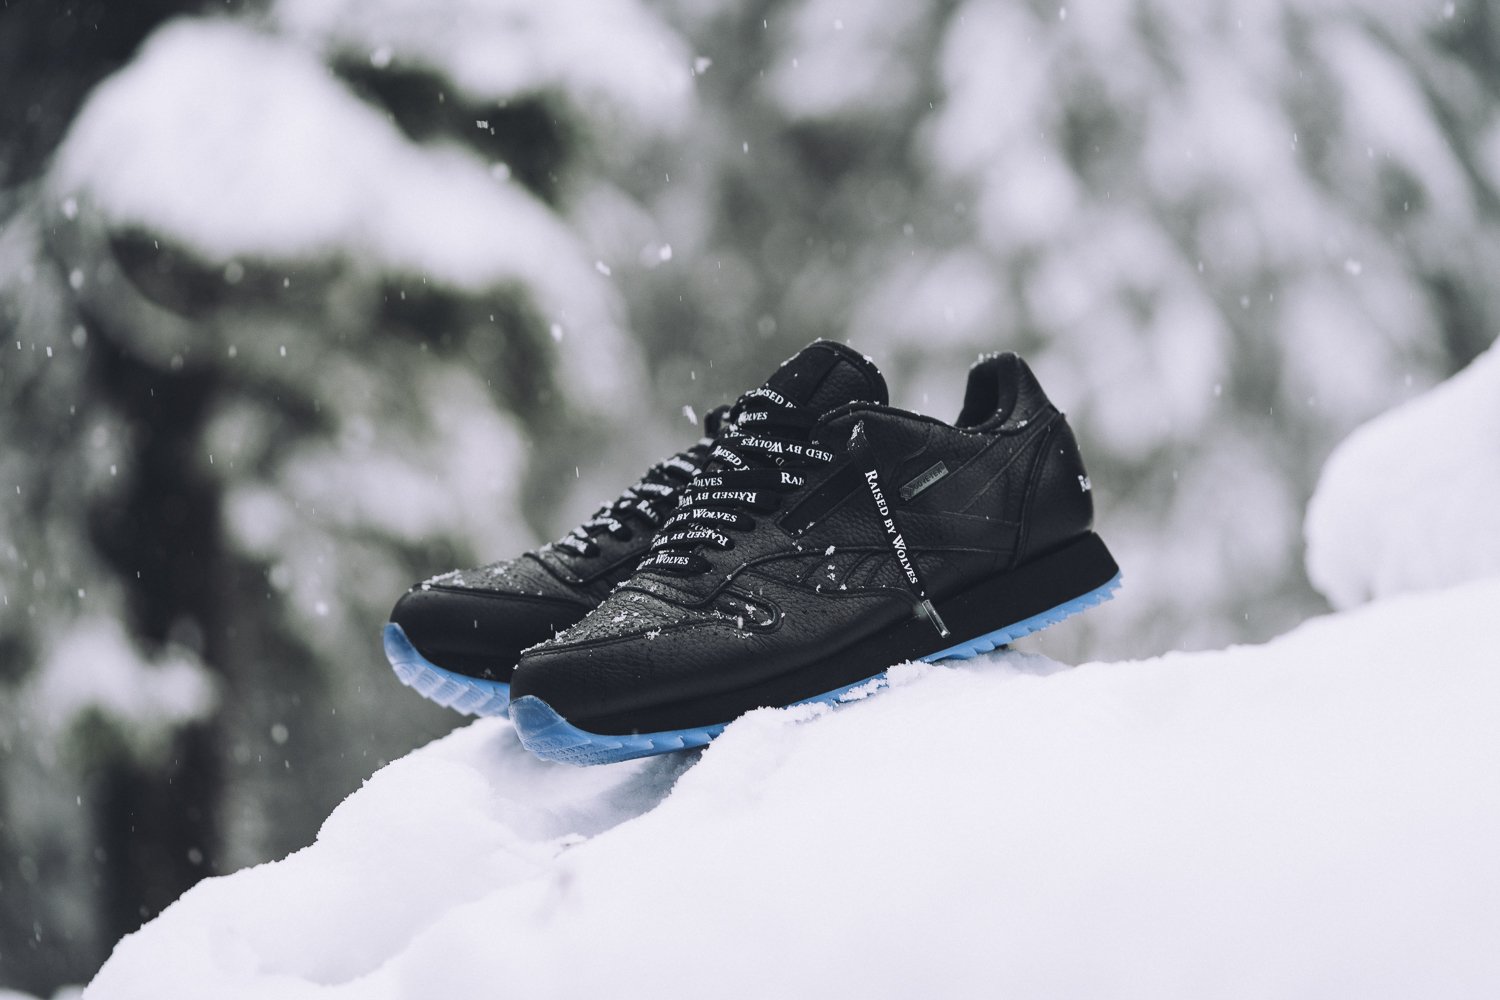 Raised By Wolves x Reebok Leather Ripple Gore-Tex Pack Drops This Weekend